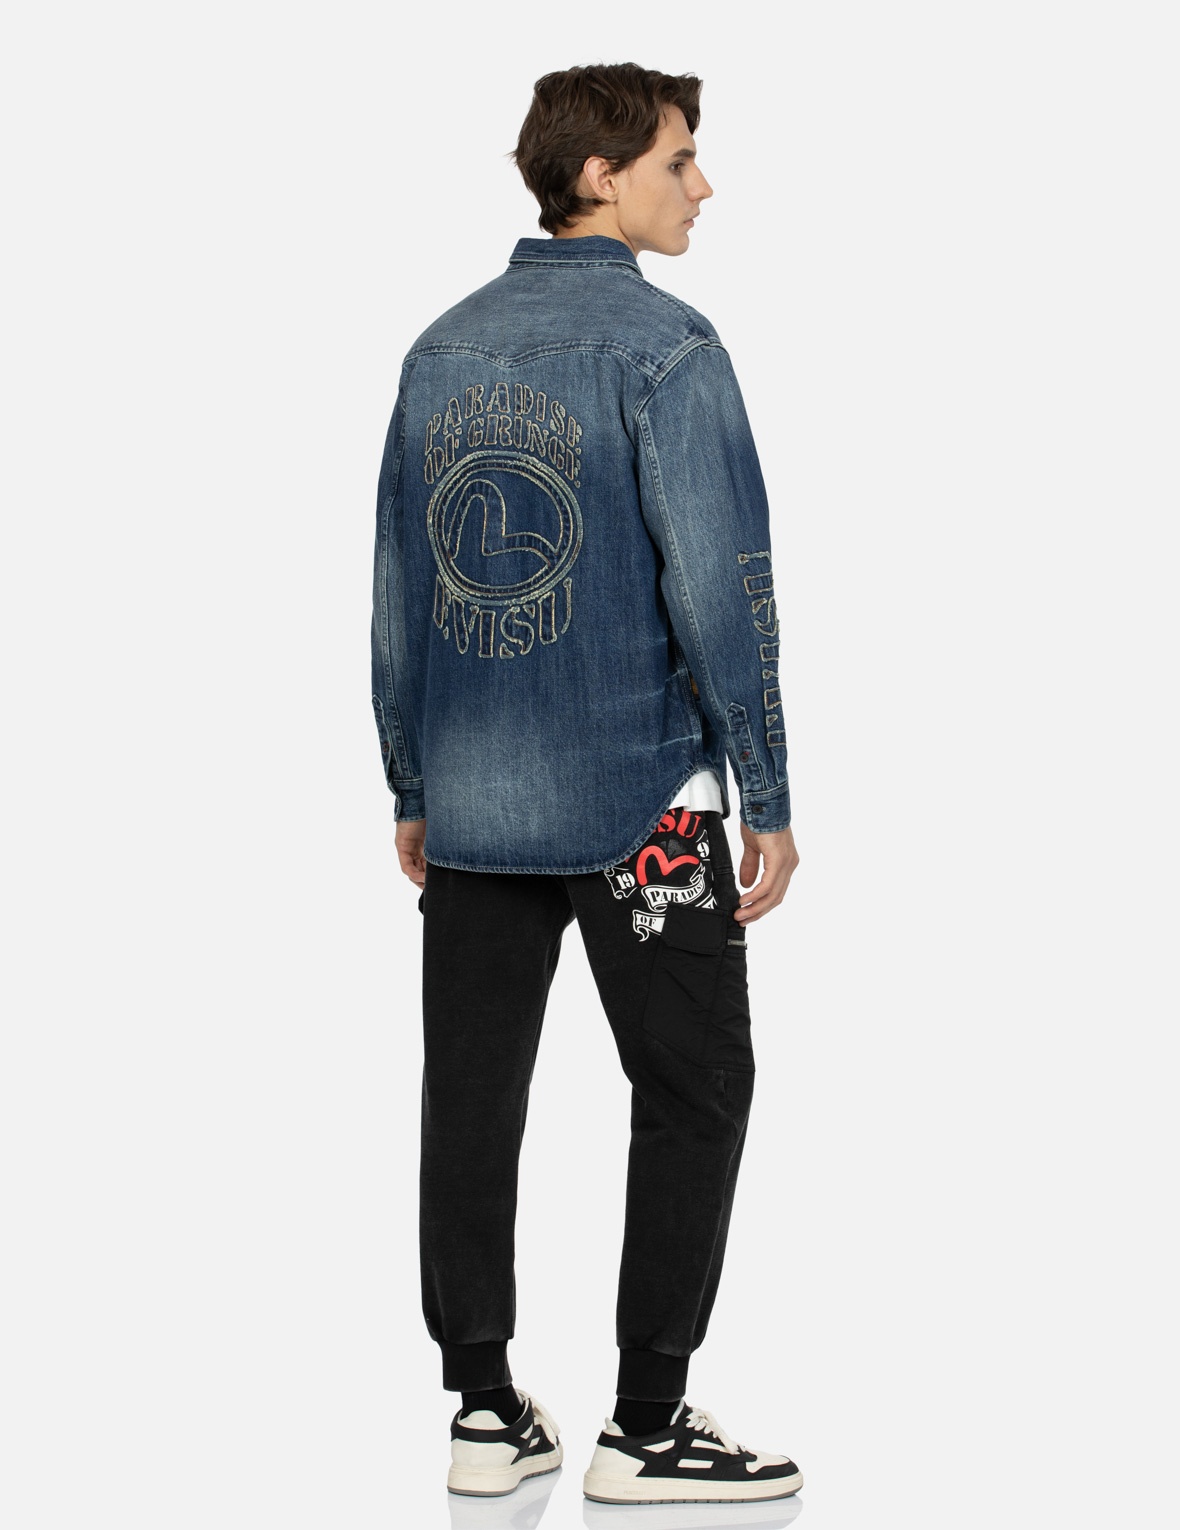 GRUNGE STYLE LOGO AND SEAGULL APPLIQUÉ RELAX FIT DENIM SHIRT - 3